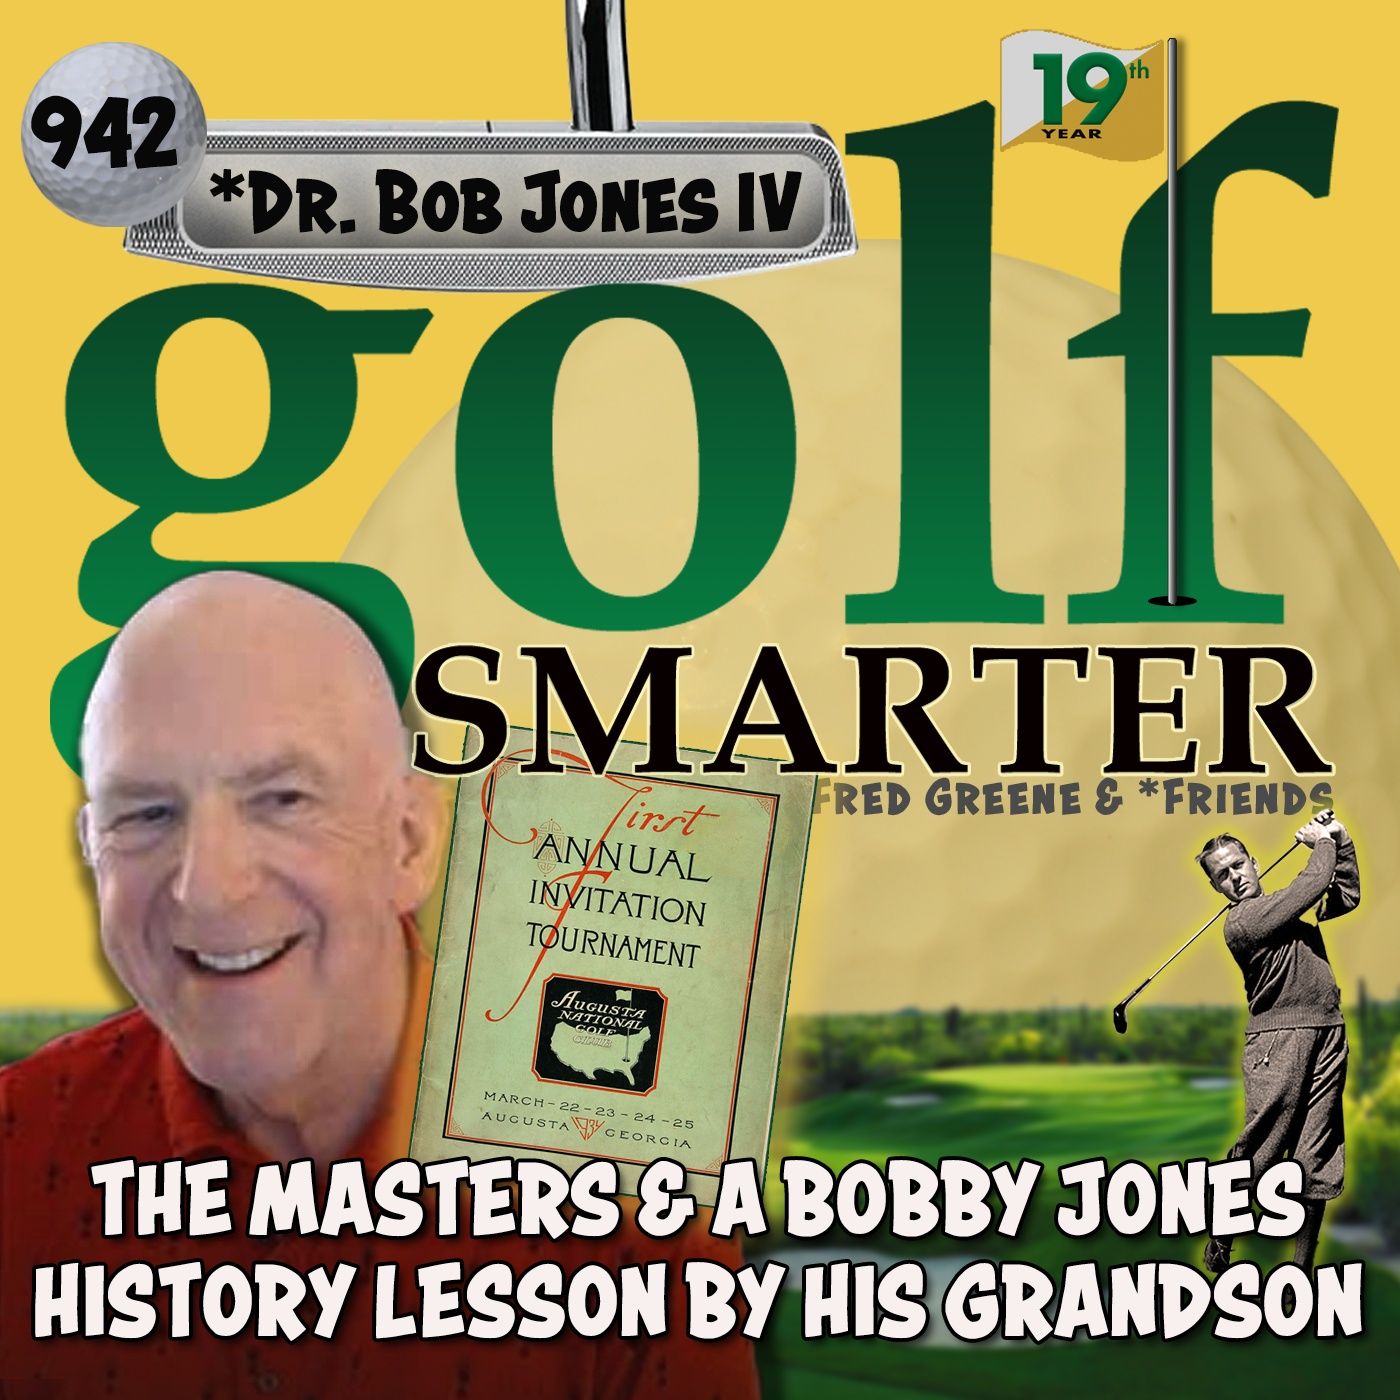 The Masters & a Bobby Jones History Lesson Through the Eyes and Heart of His Grandson